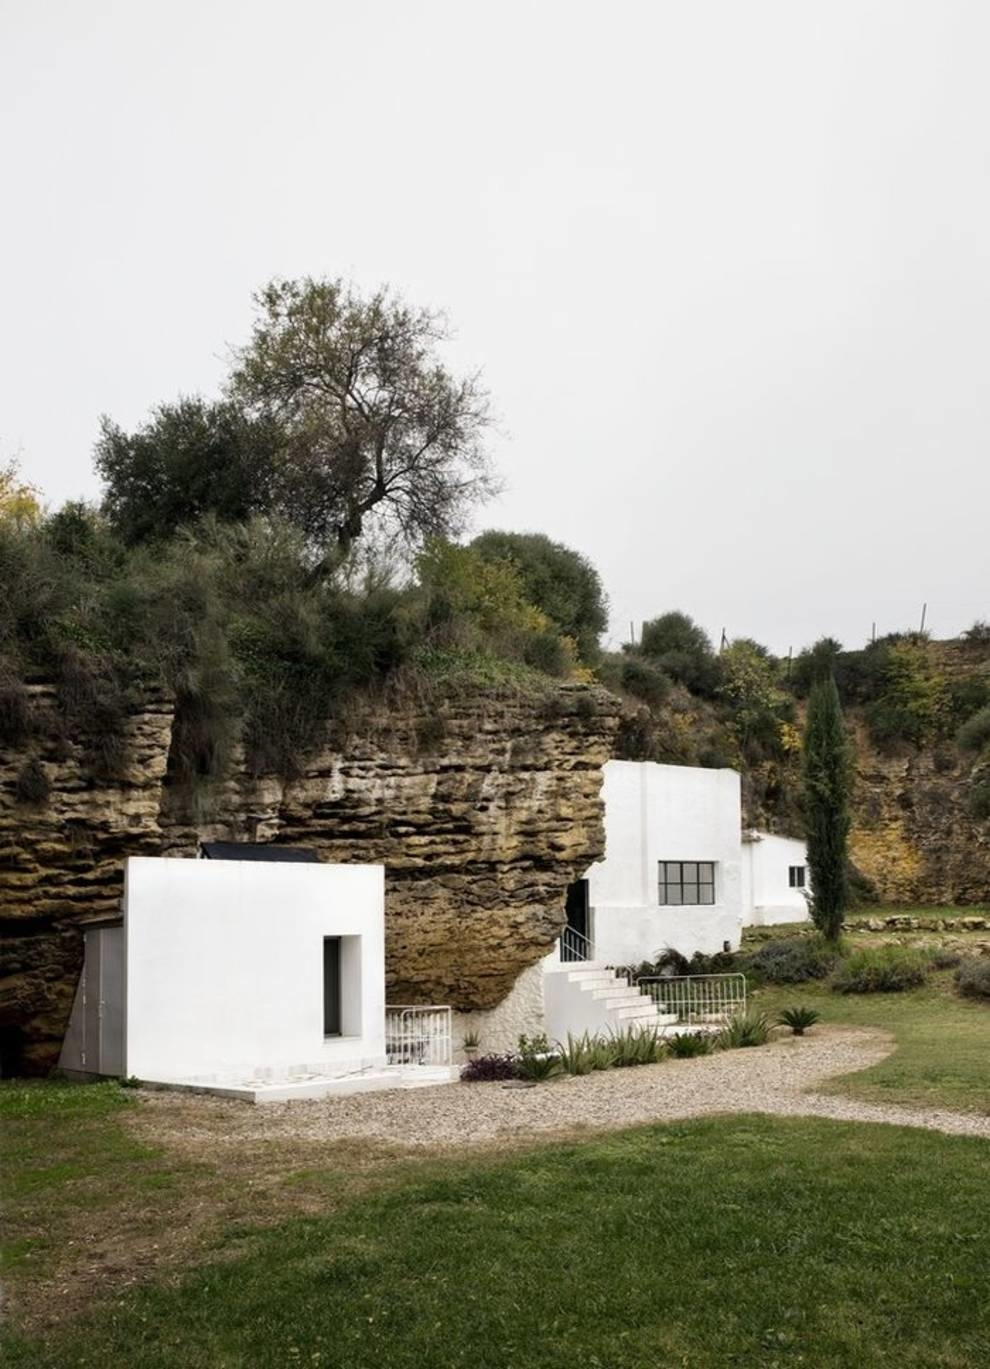 Once it was a cave, and now it is a modern house